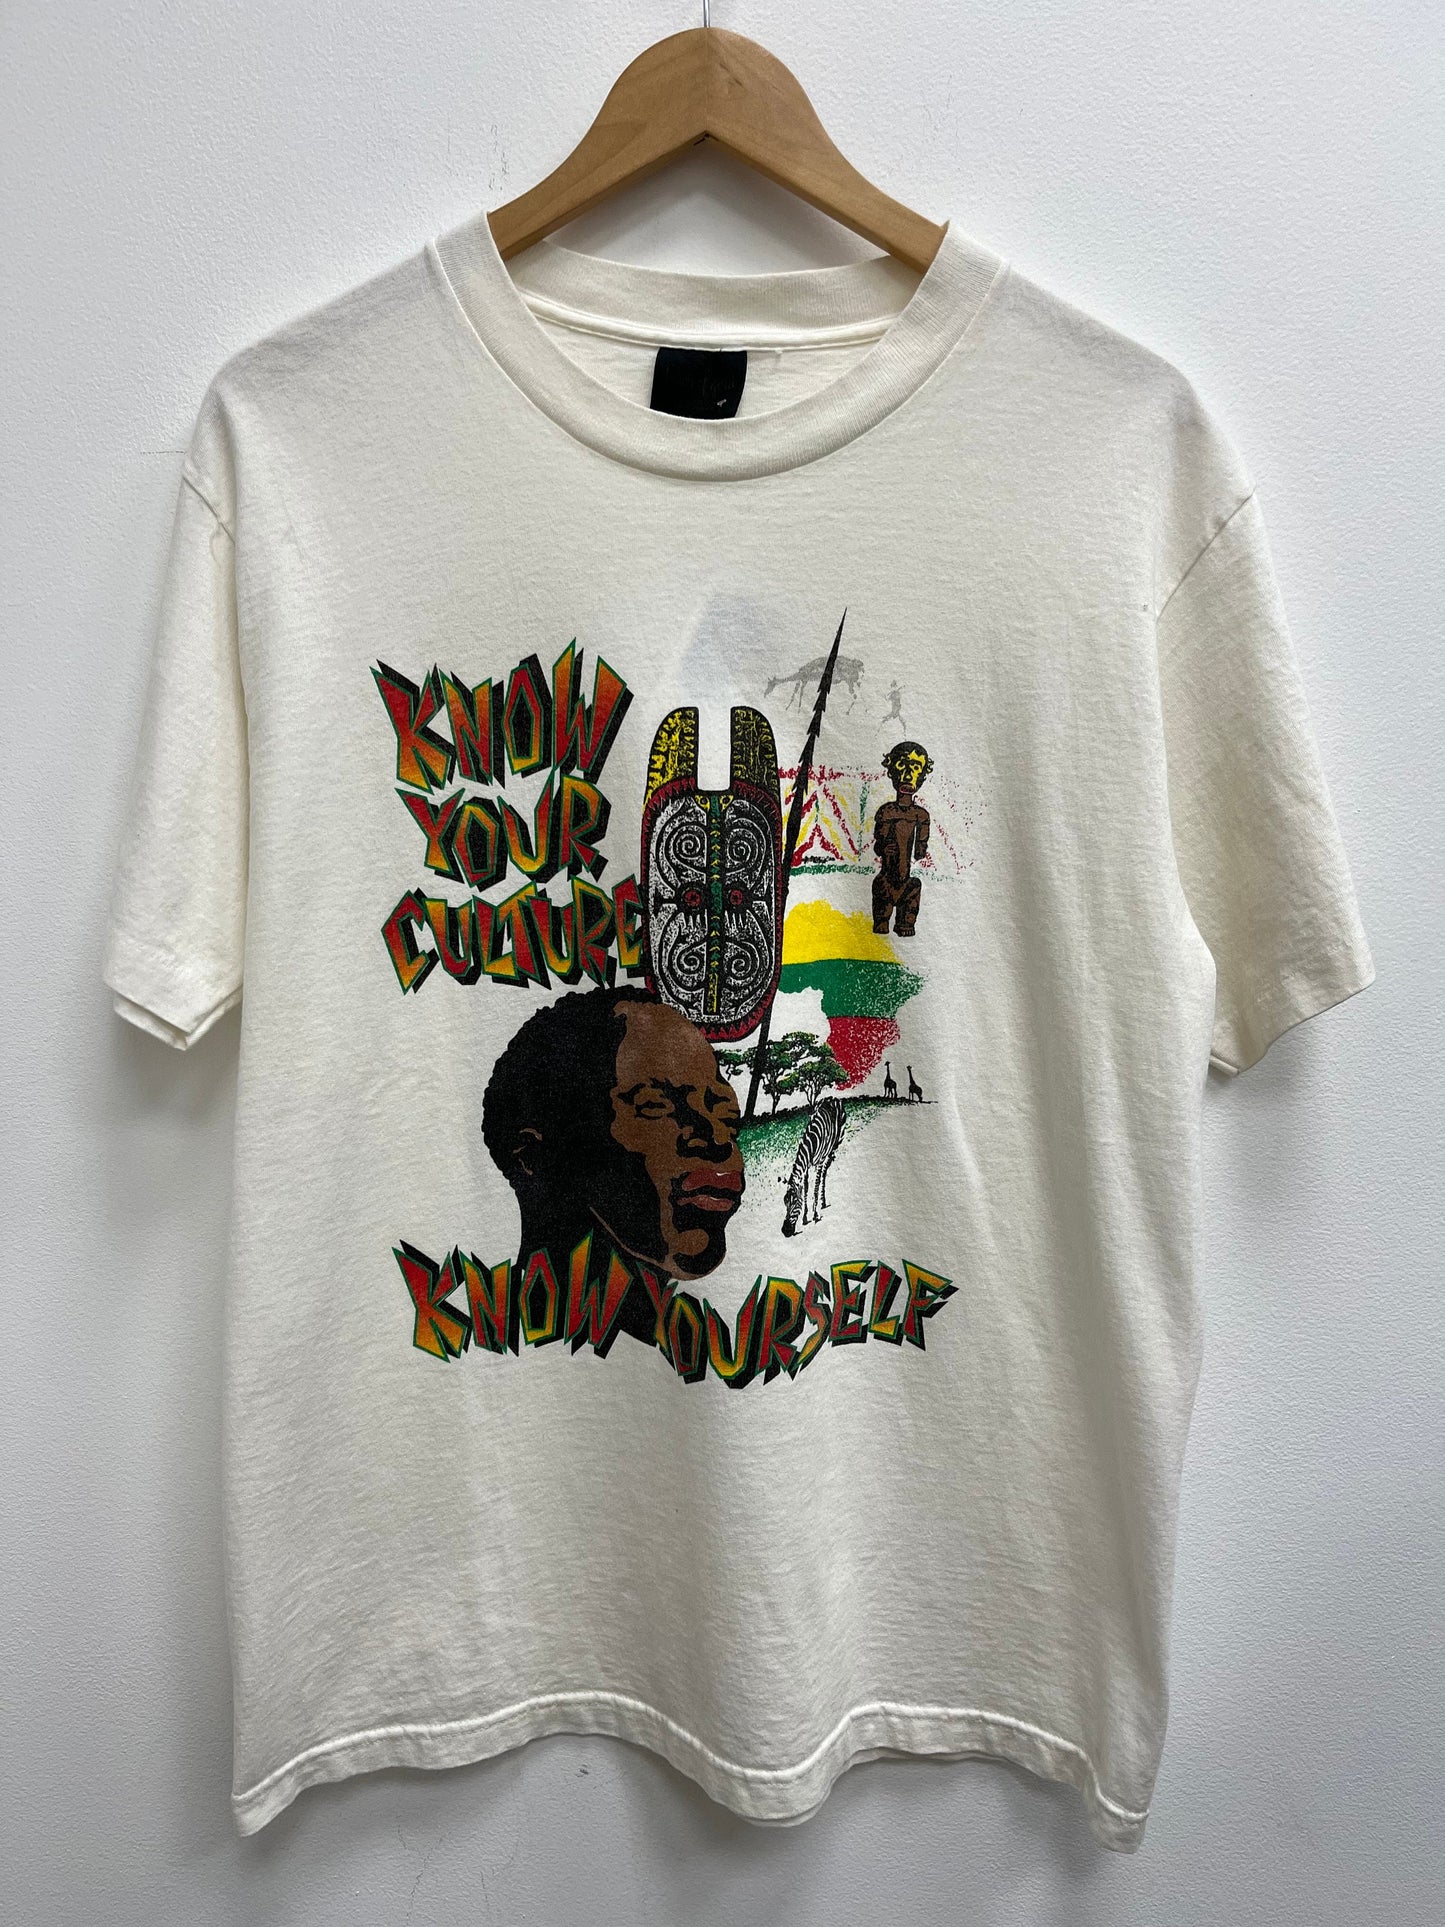 Vintage 1990’s Know Your Culture Tee